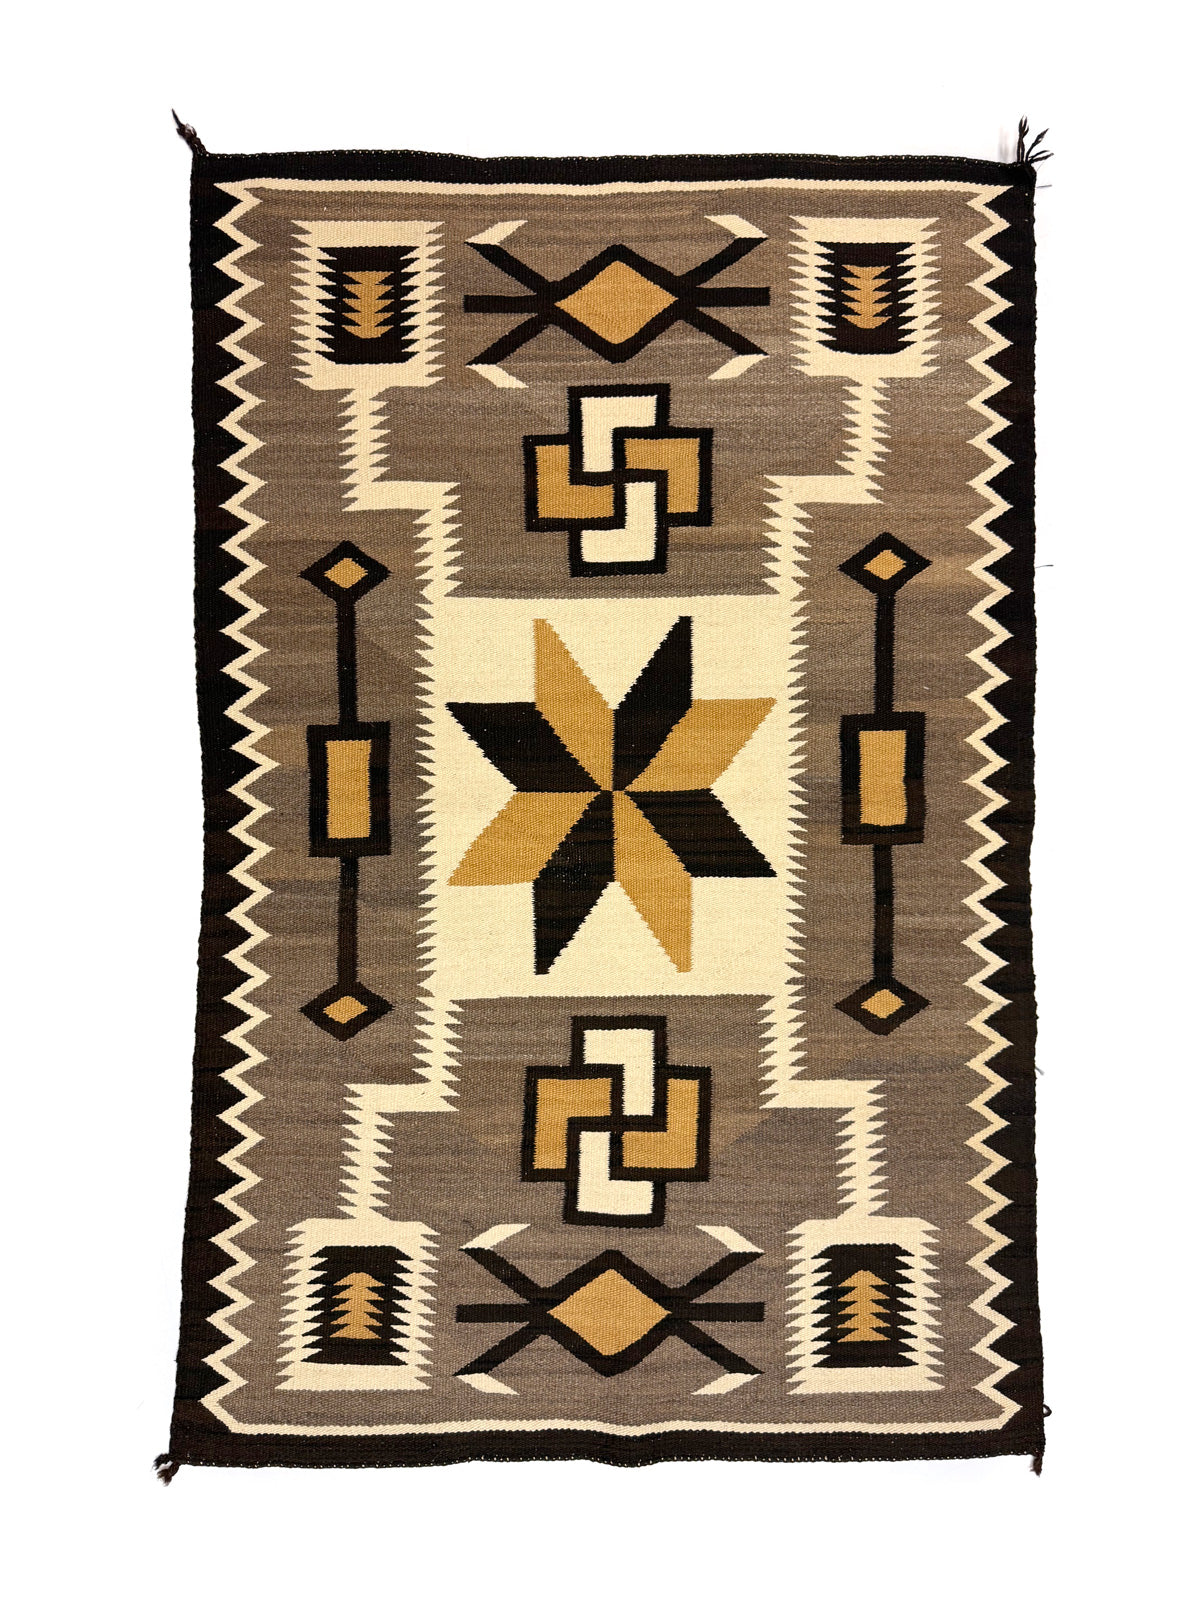 Alice Lefthand - Navajo Crystal Storm Pattern Rug with Valero Star and Waterbug Pictorials c. 1970s, 58" x 38" (T6592)